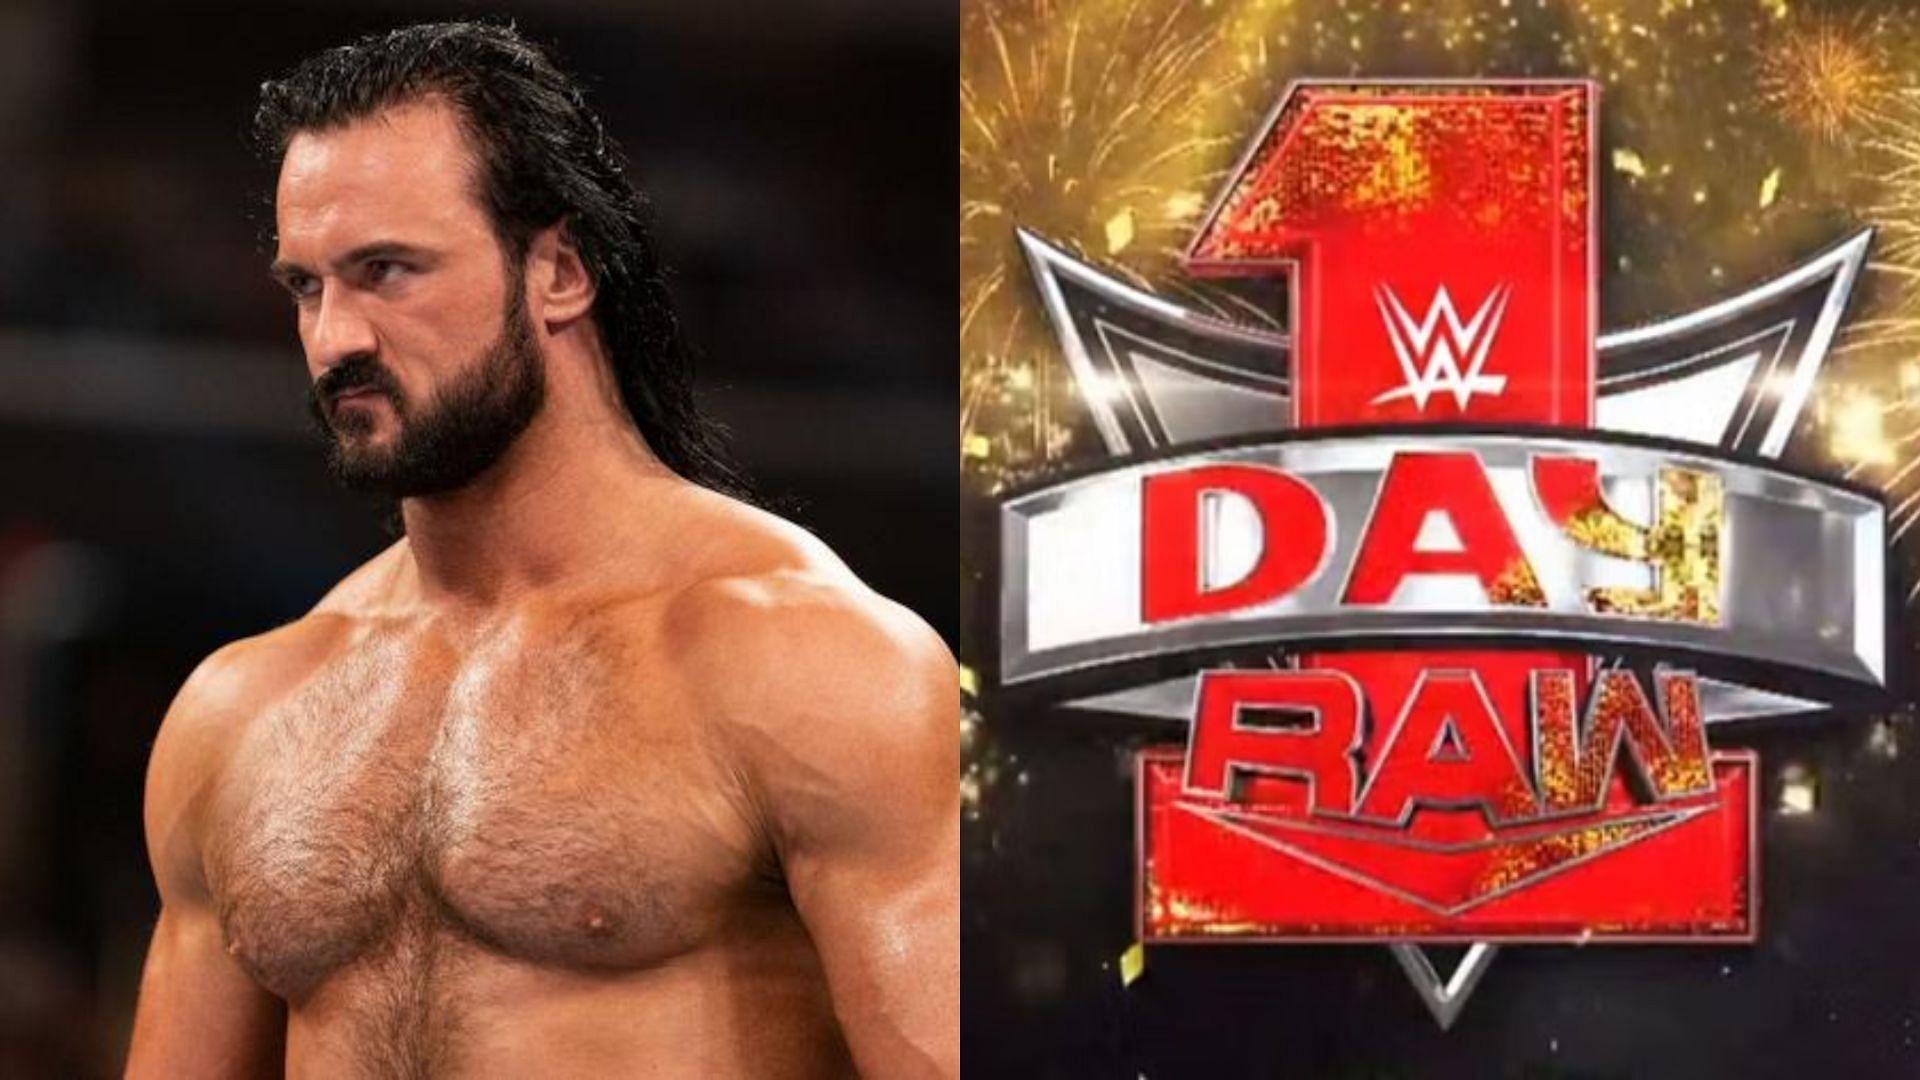 Drew McIntyre faced one of his biggest rivals on WWE RAW Day 1